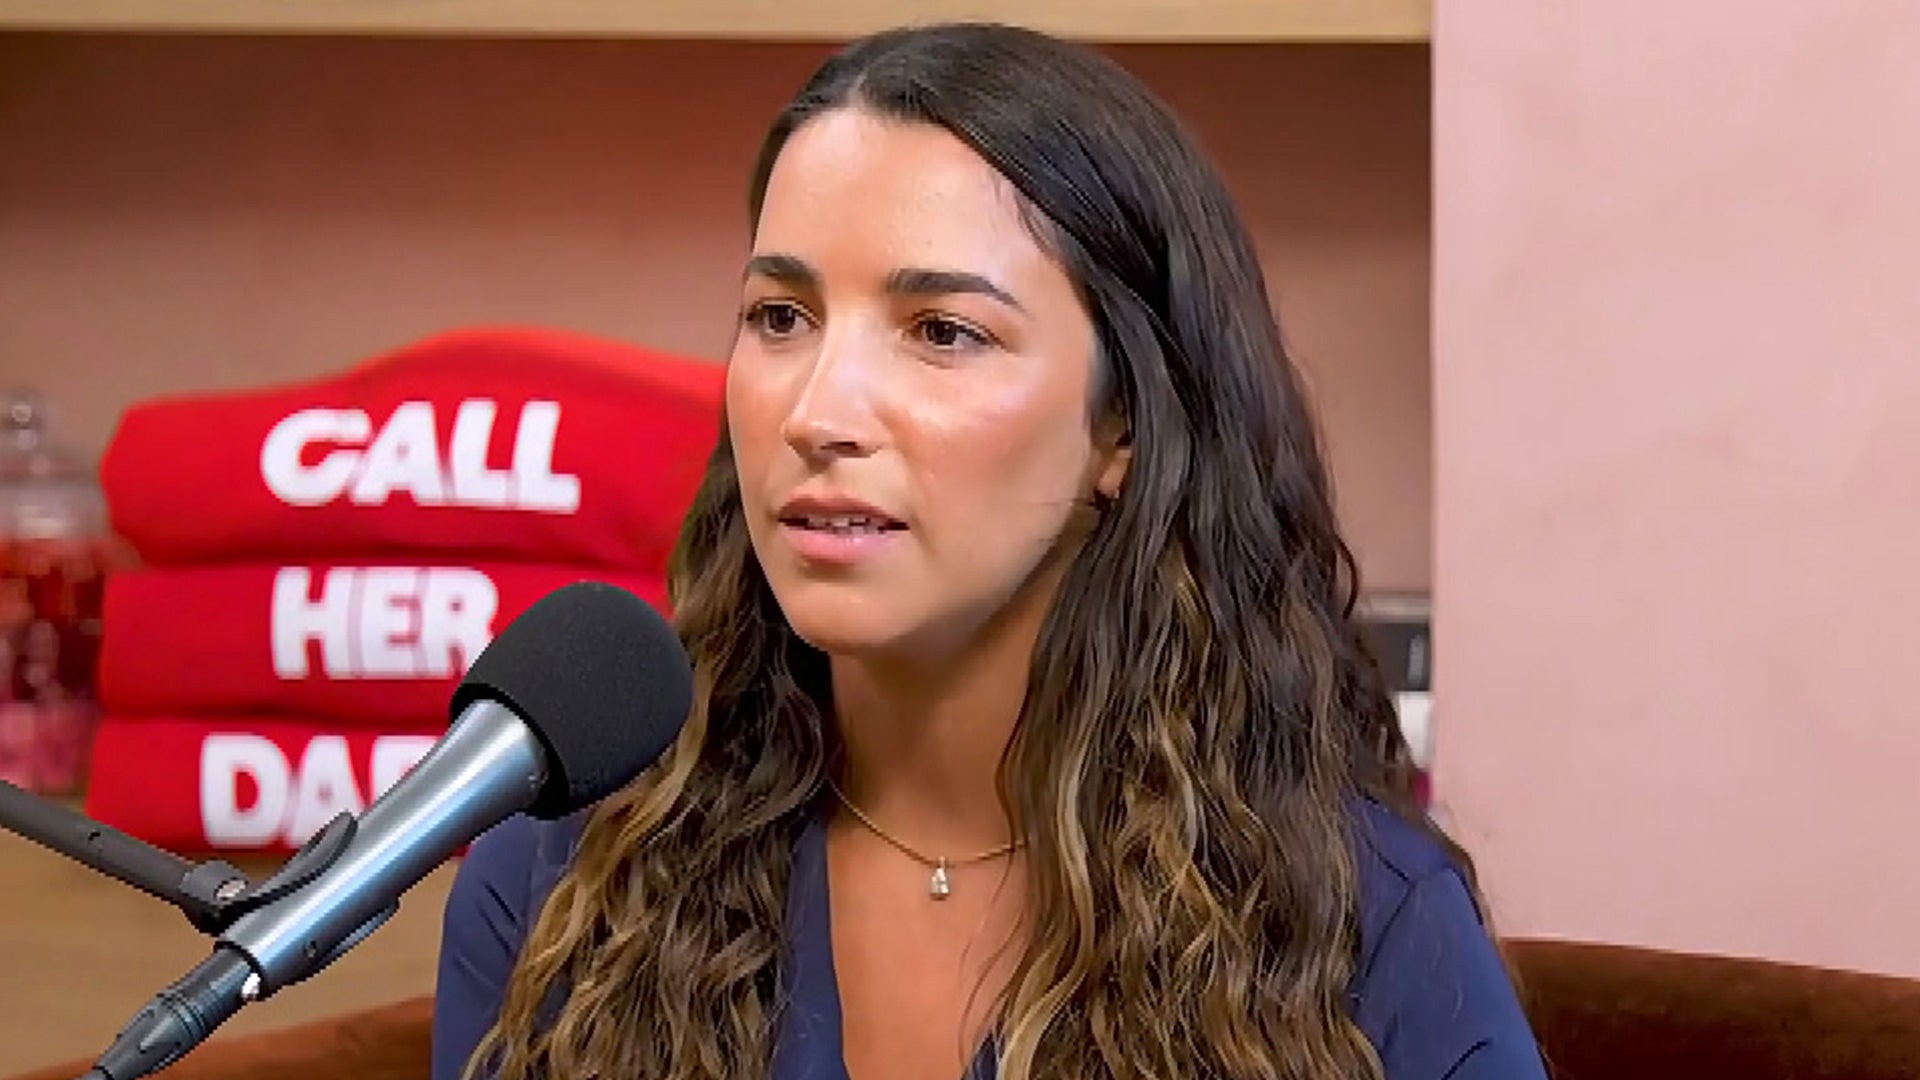 Olympic Gymnast Aly Raisman Says She Was Hospitalized Twice After 'Complete Body Paralysis'